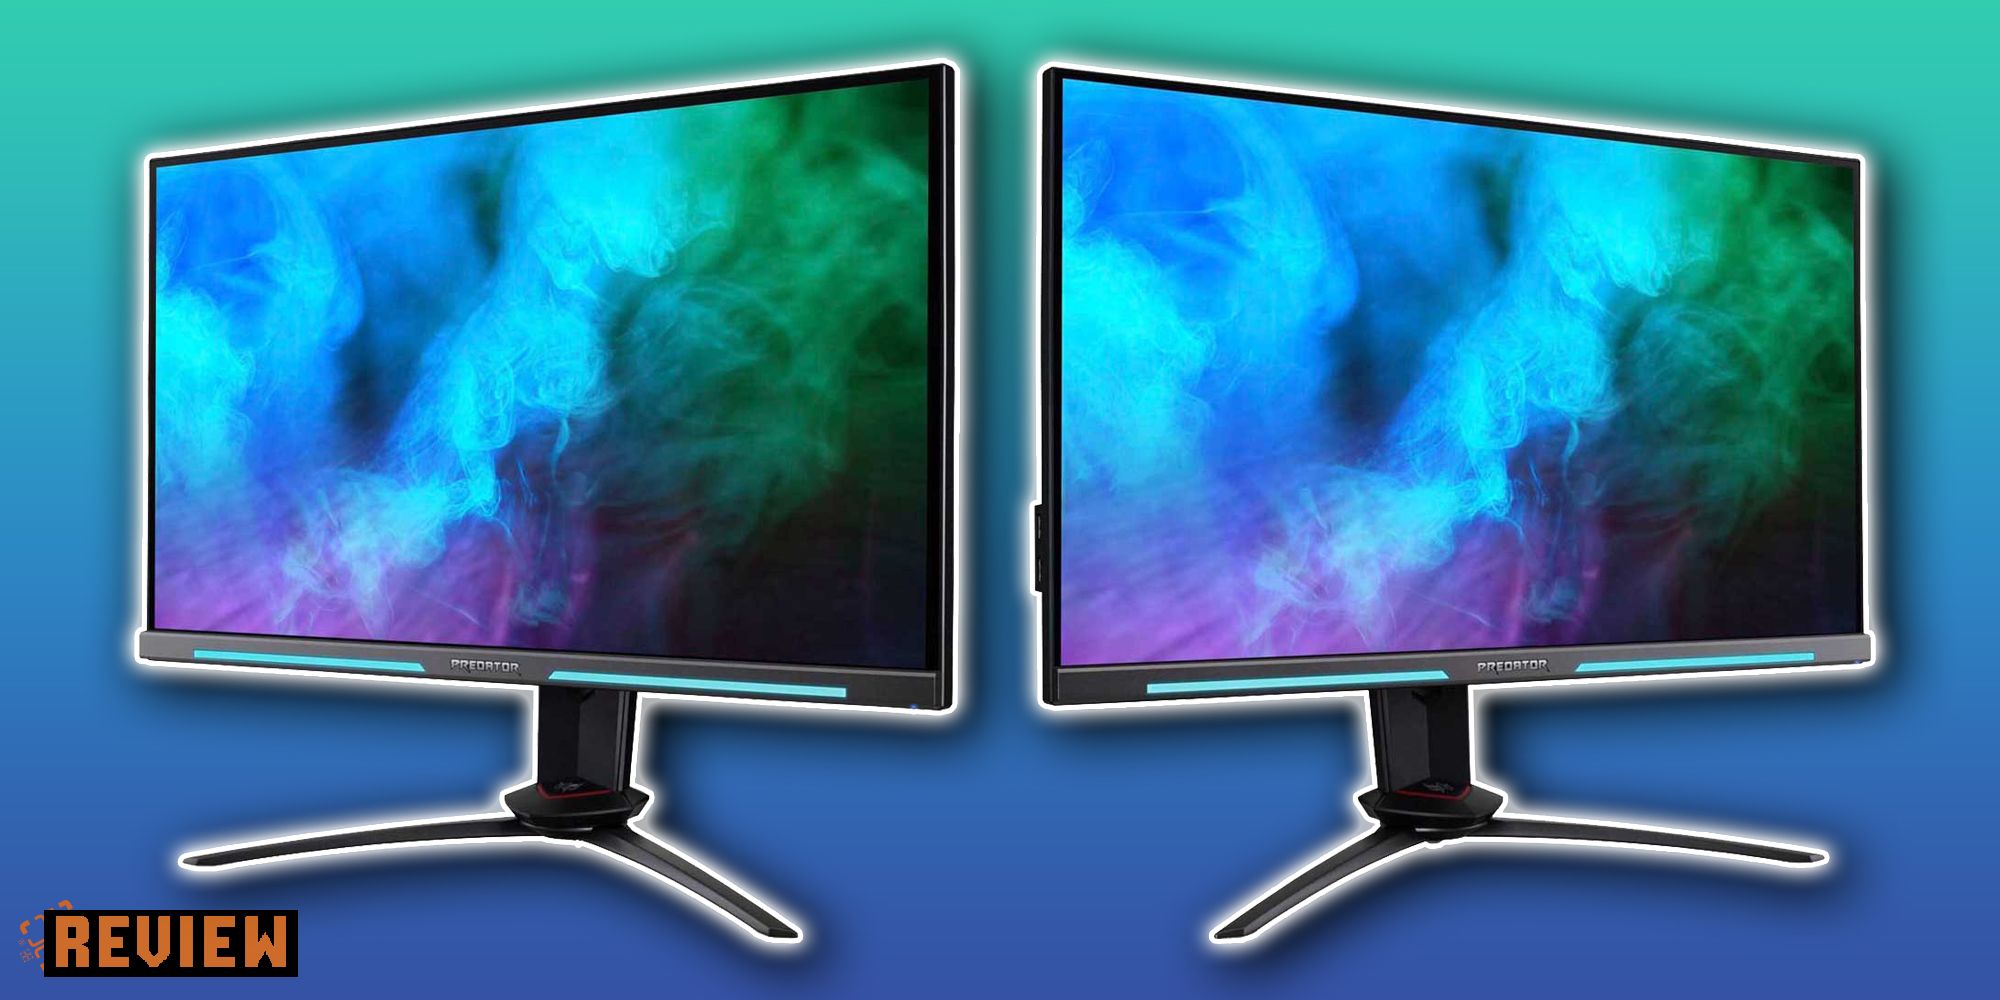 Product images for the Predator XB253Q GW Monitor.